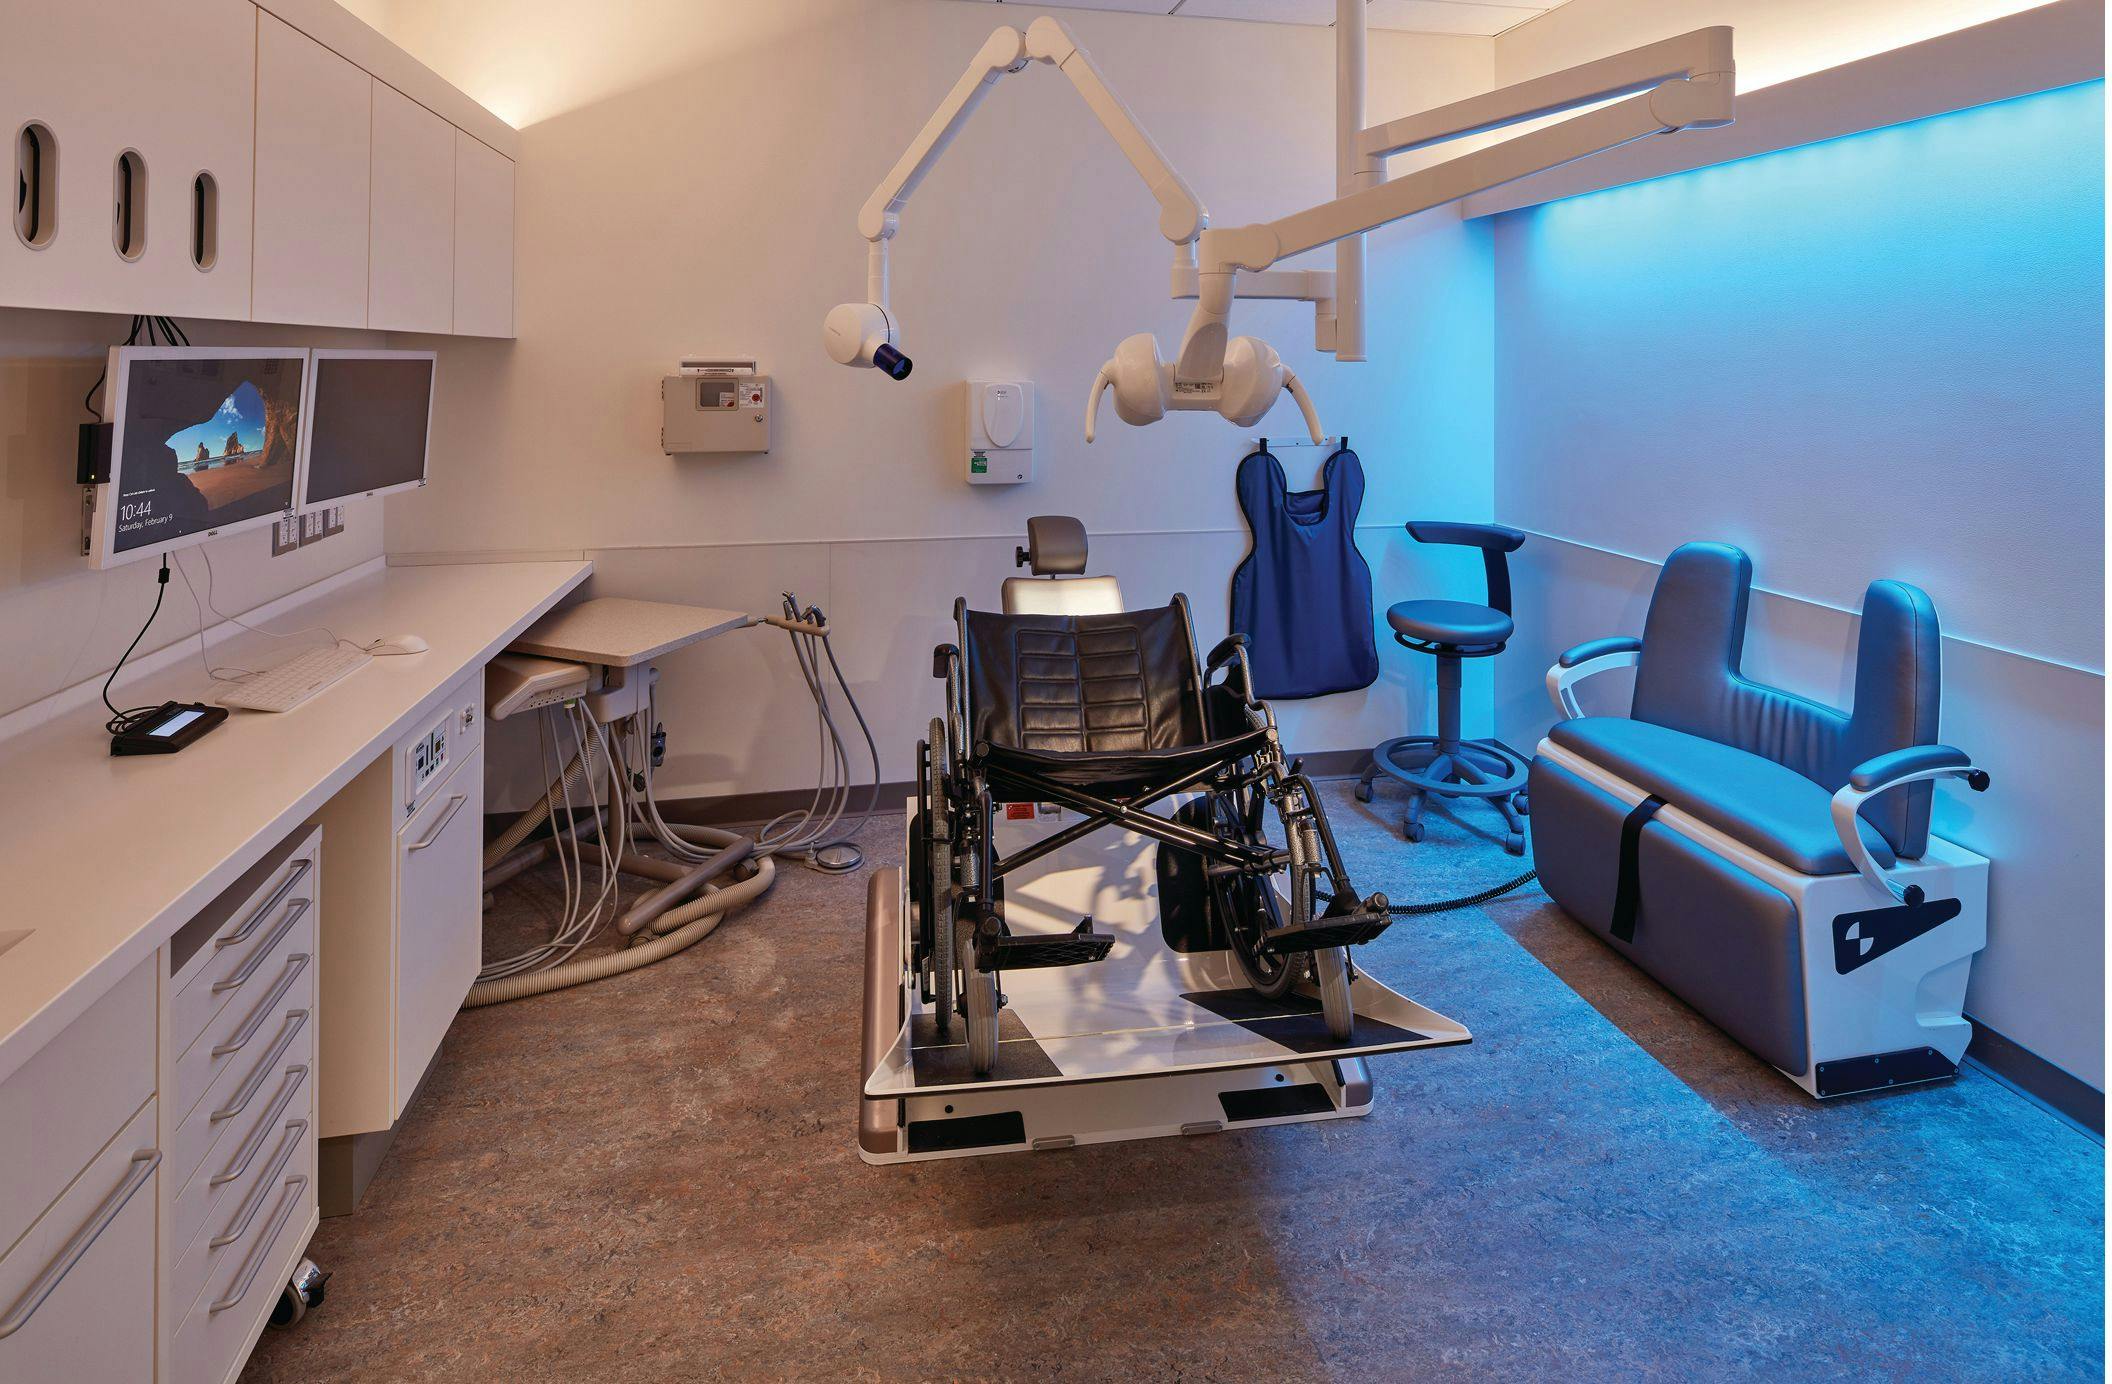 In 2019, New York University’s College of Dentistry opened the NYU Dentistry Oral Health Center for People with Disabilities. The center provides comprehensive oral health care for those with physical, cognitive, and developmental disabilities and is specially designed to meet the needs of this unique population. Pictured is one of the center’s operatories that was designed to accommodate a wheelchair.